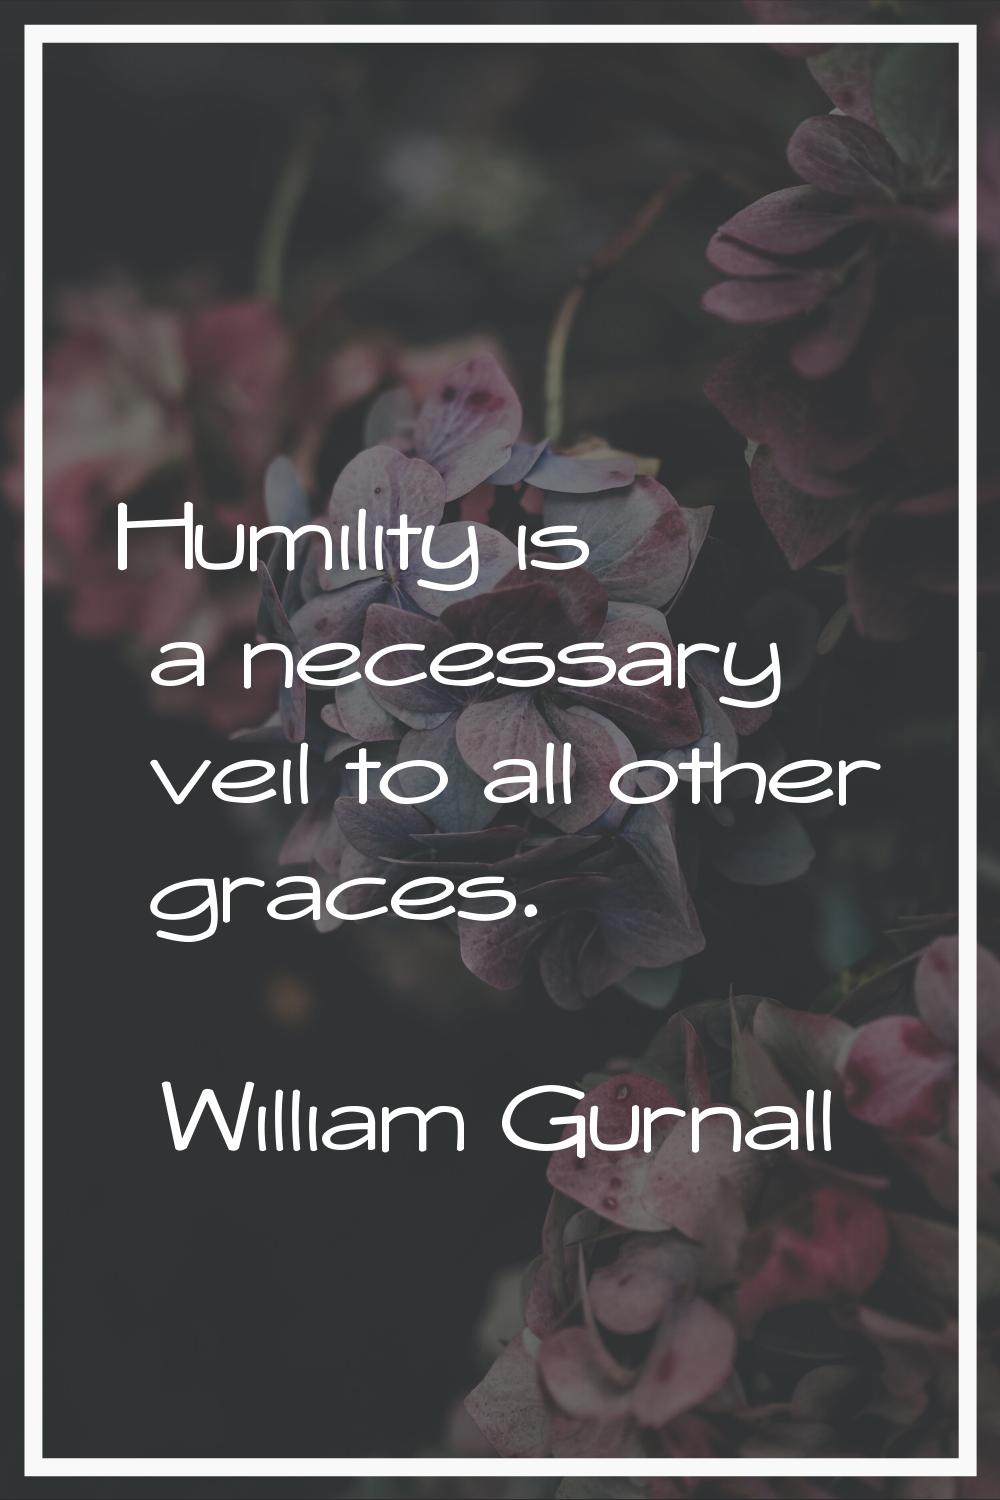 Humility is a necessary veil to all other graces.